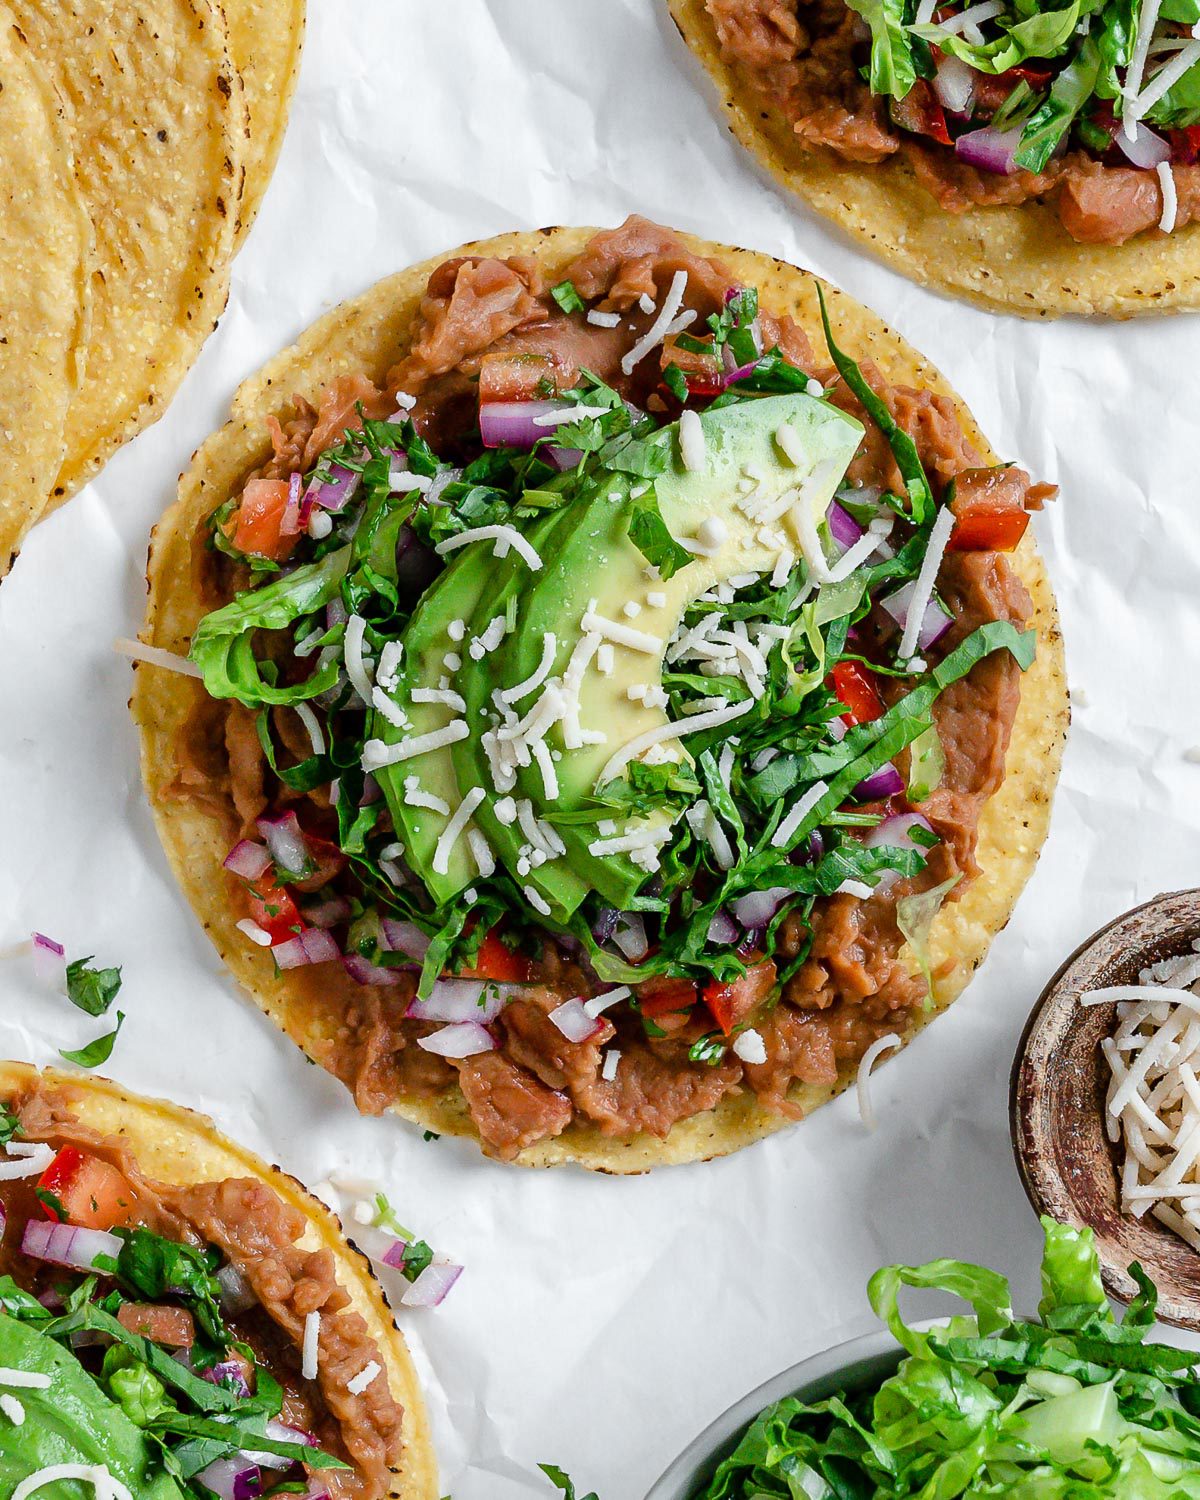 completed Vegan Bean Tostadas with tostadas in the background against a light surface